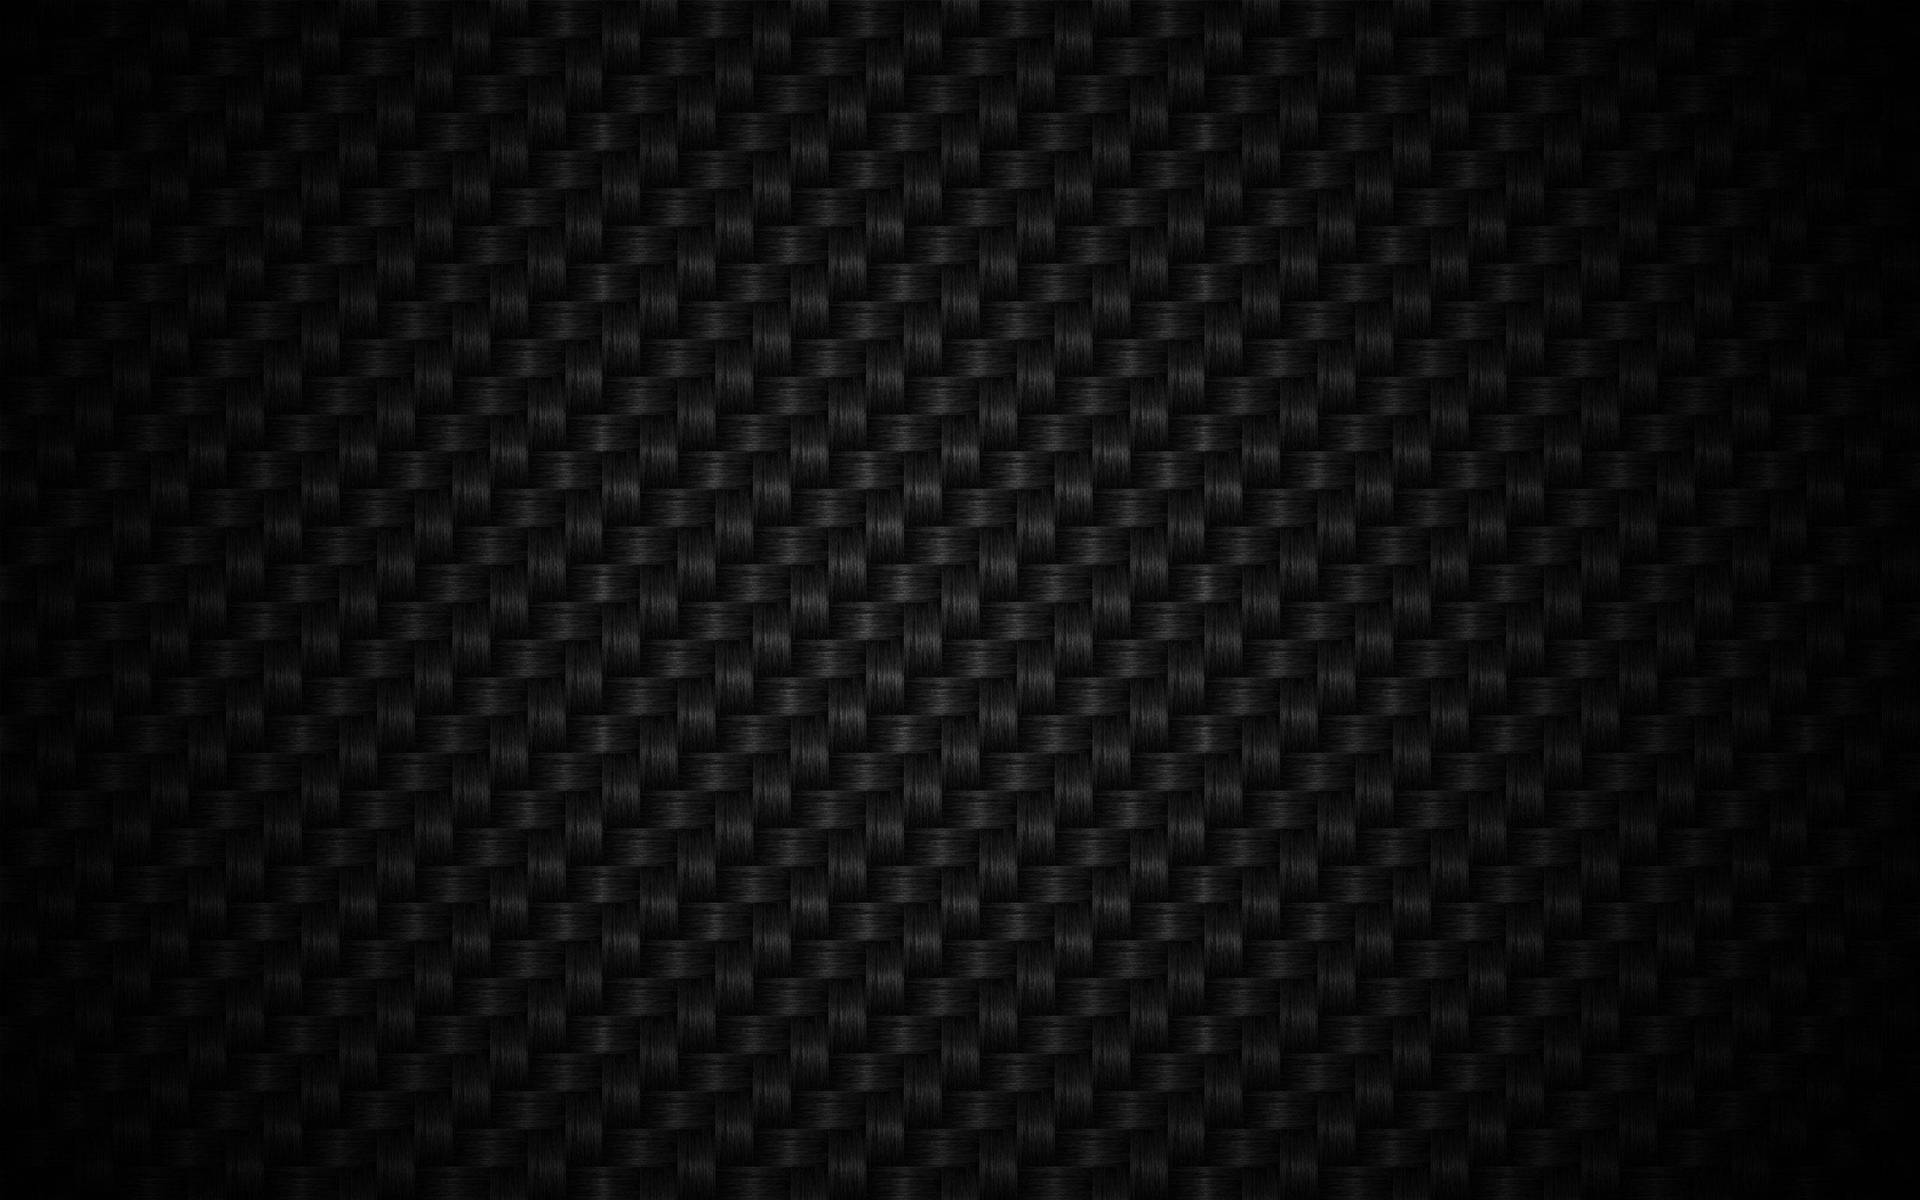 500 Black Screen 4k Wallpapers  Background Beautiful Best Available For  Download Black Screen 4k Images Free On Zicxacomphotos  Zicxa Photos